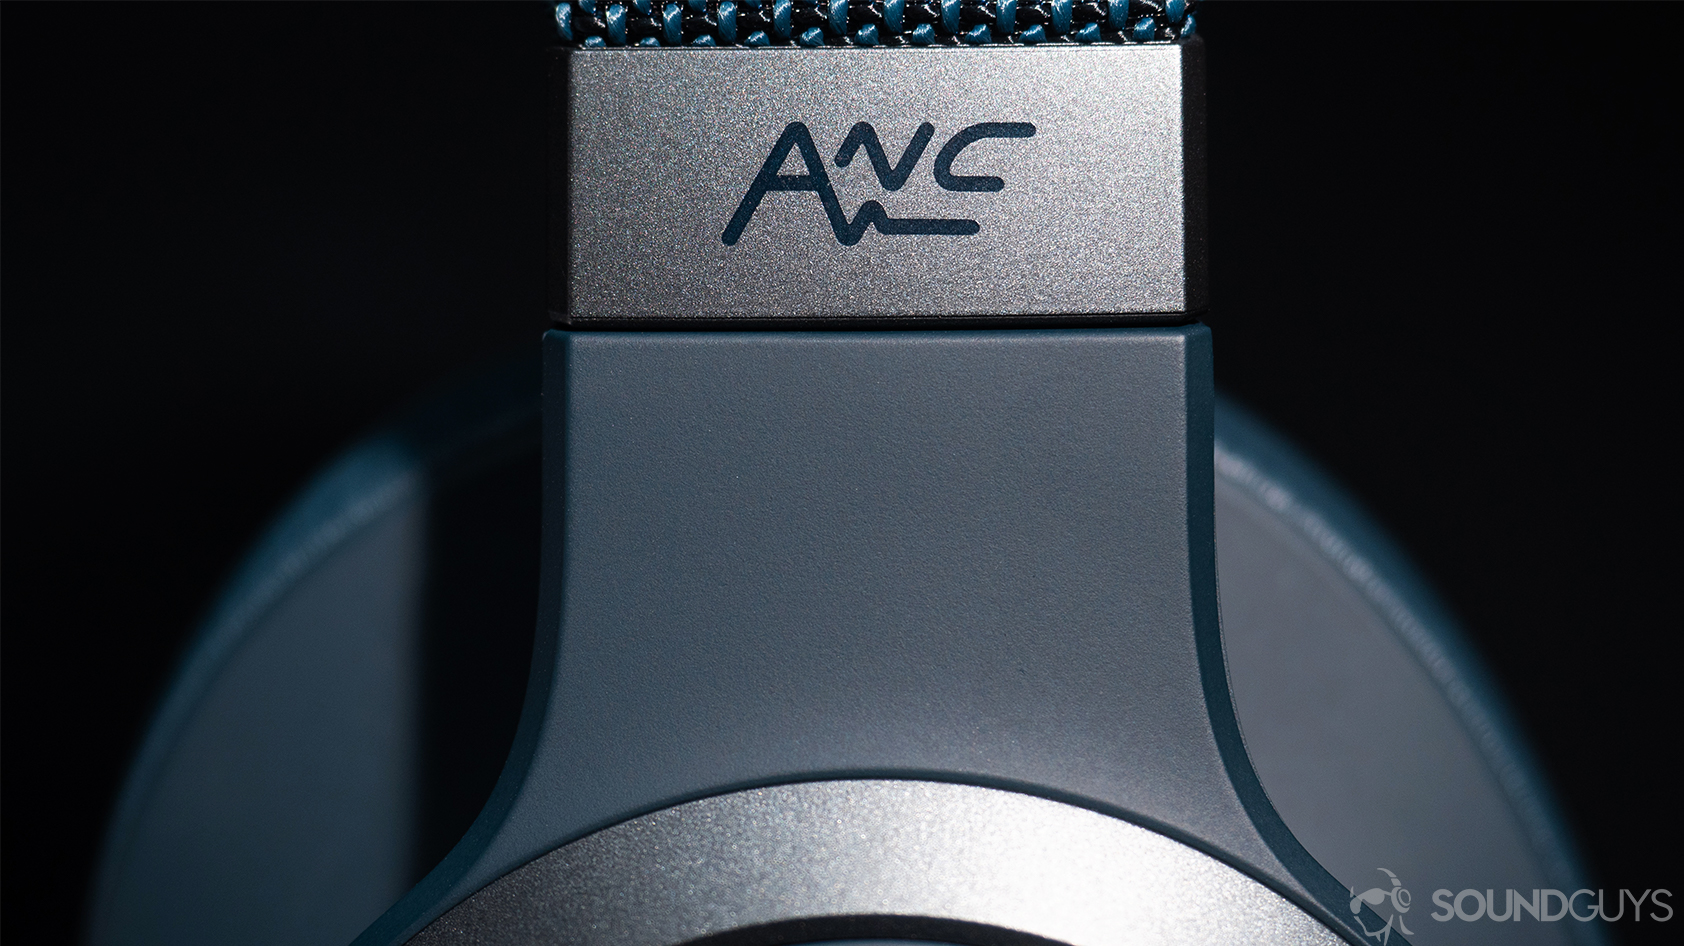 The JBL Live 650BTNC noise canceling headphones' close-up of ANC writing on the headband.